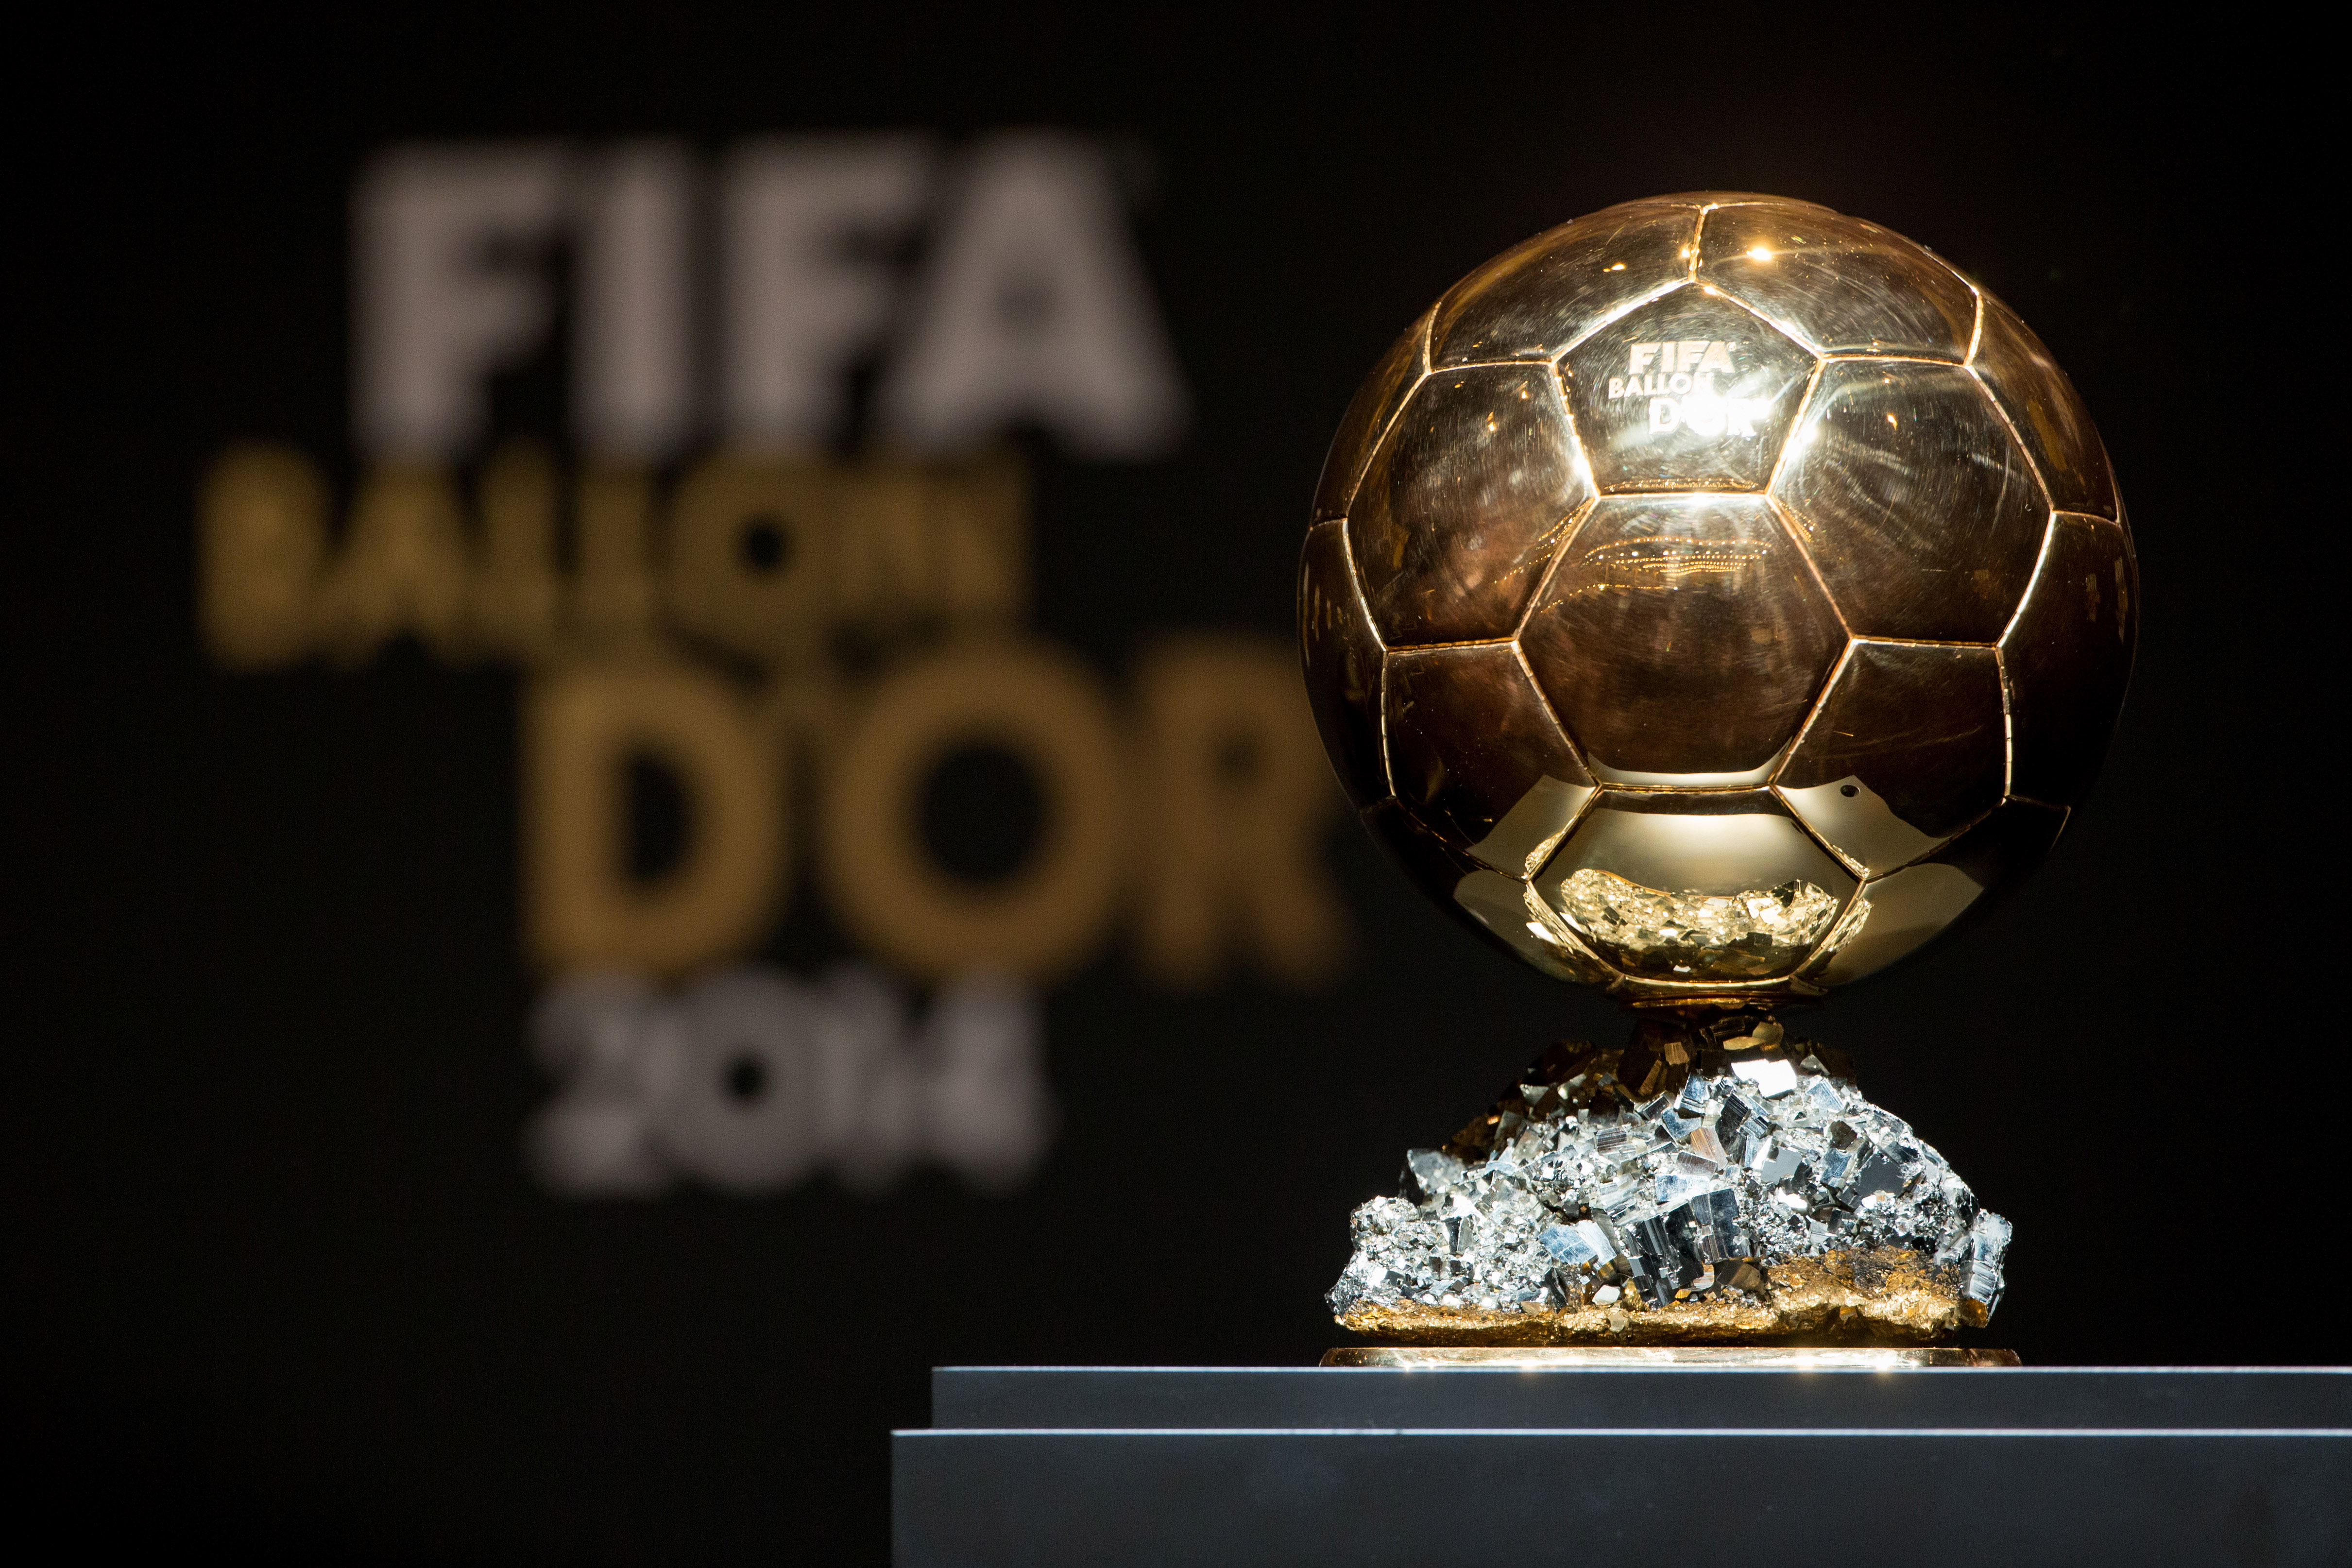 2020 Ballon d'Or cancelled as the year cannot be treated as normal